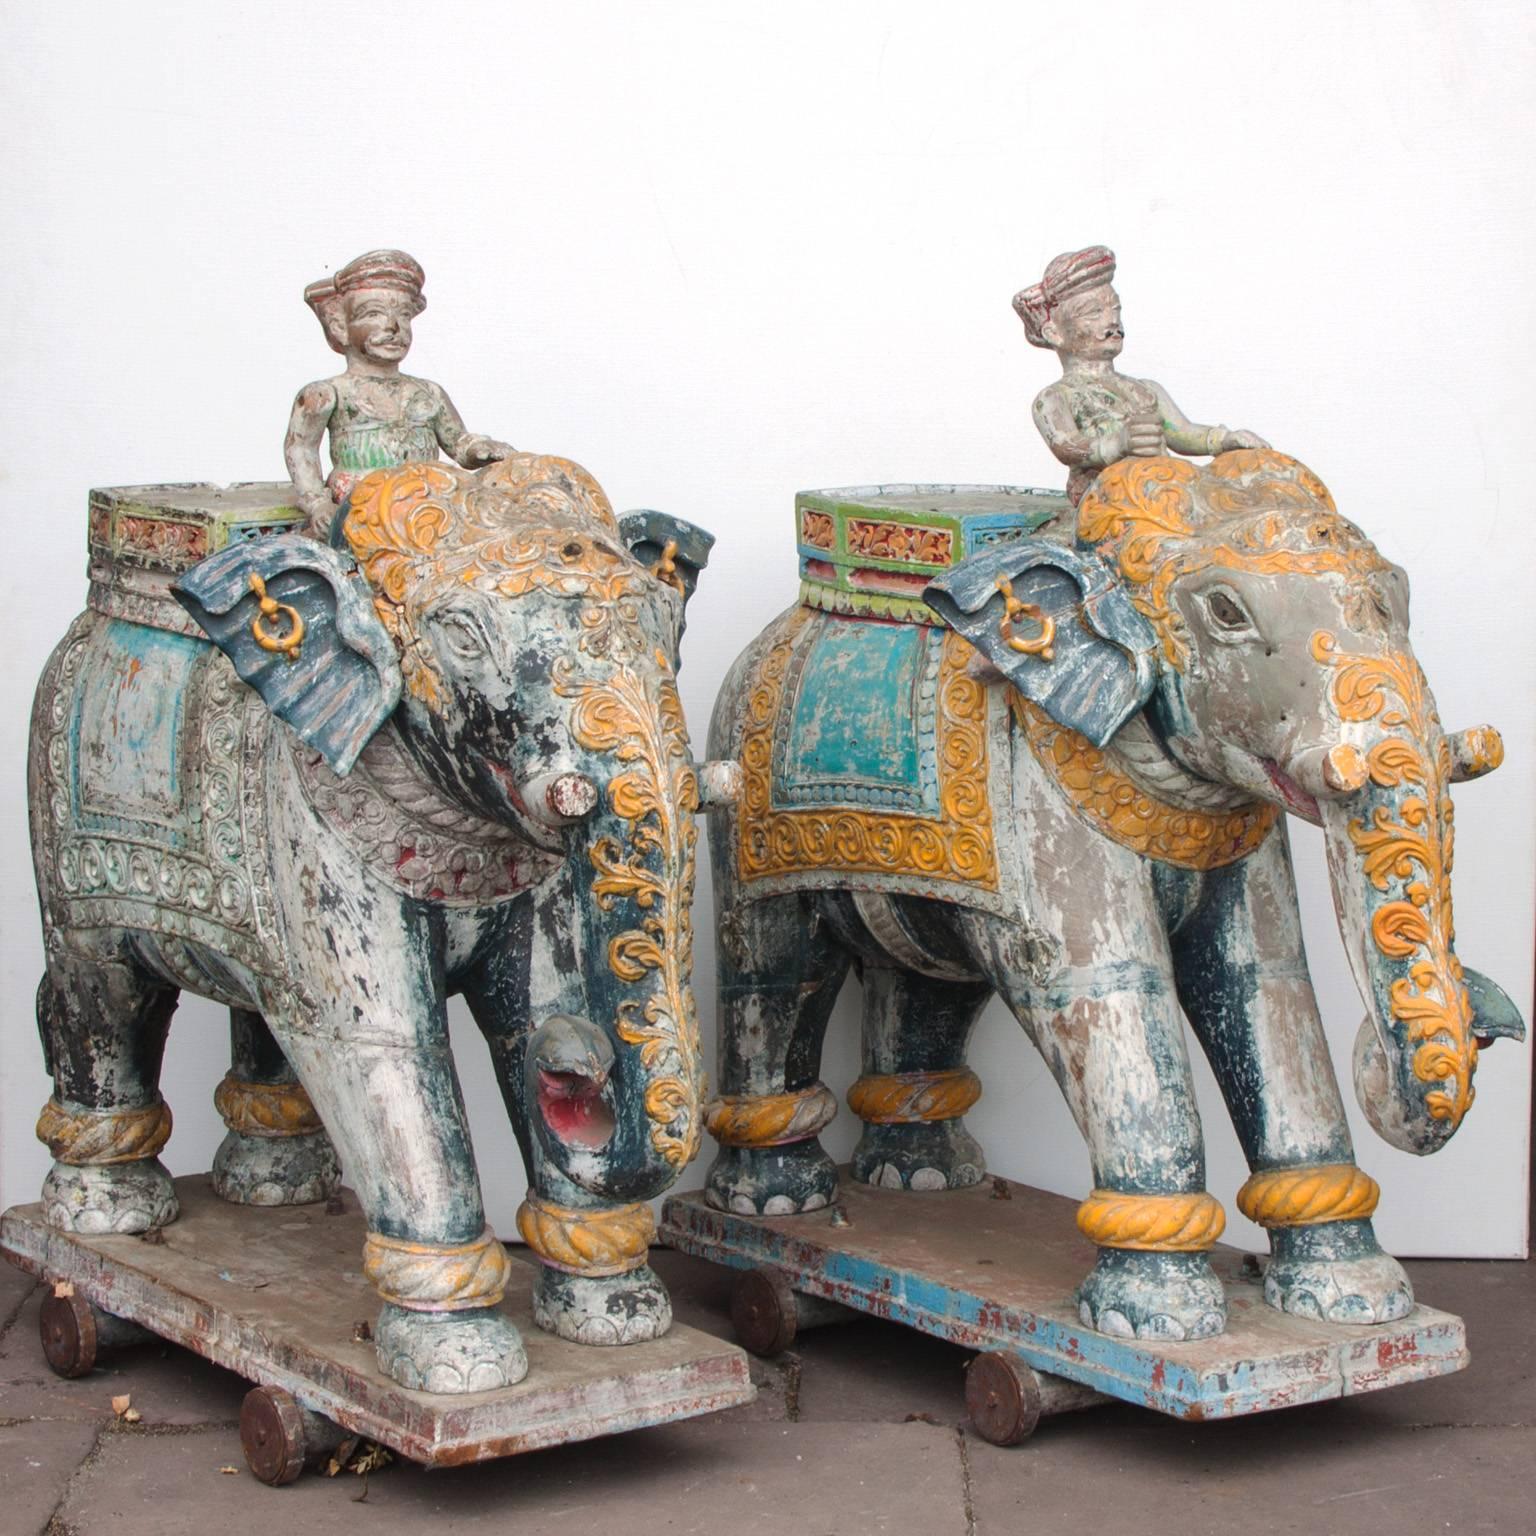 painted elephants in india